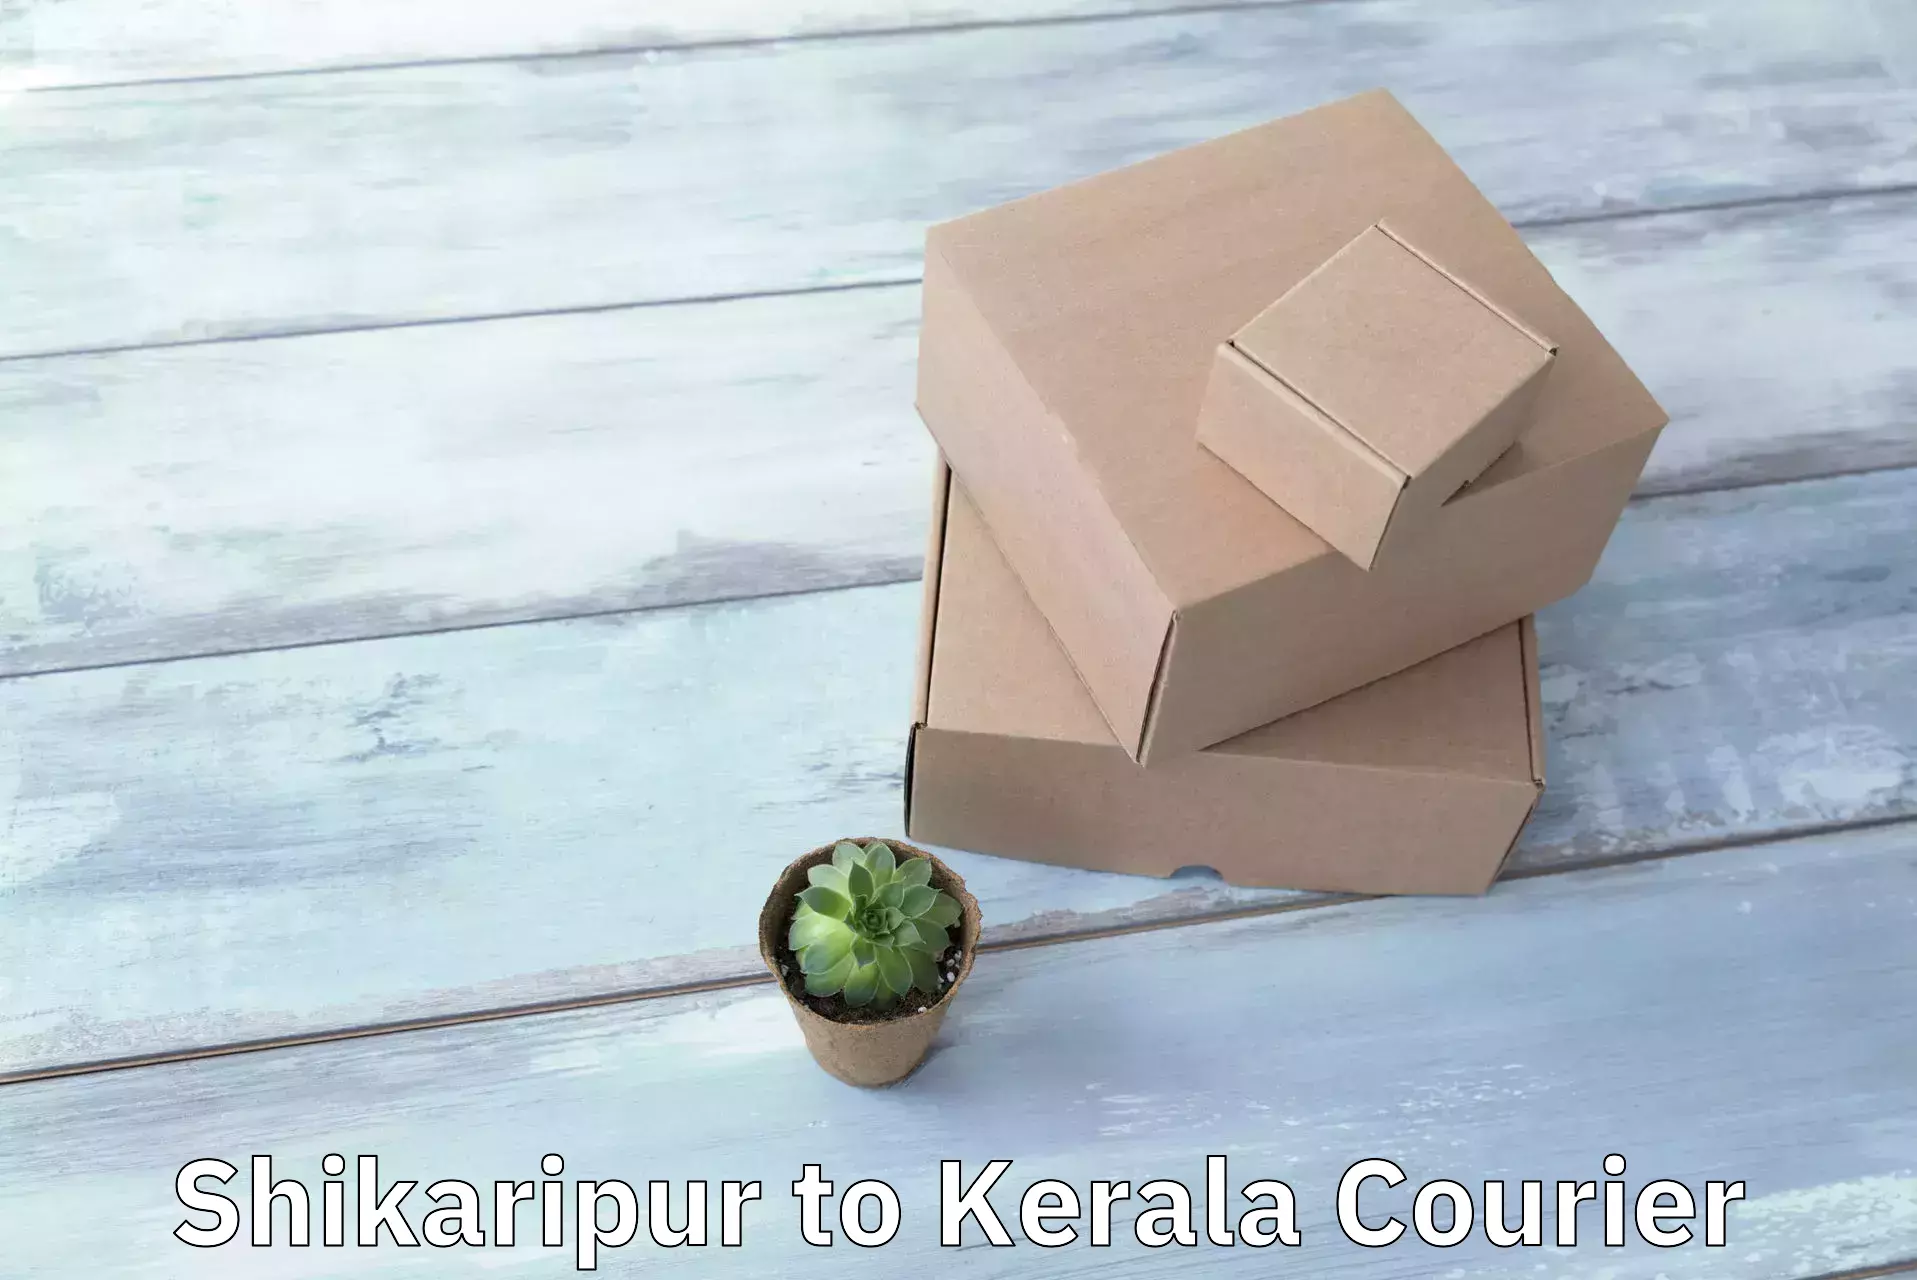 Same-day delivery options Shikaripur to Alappuzha